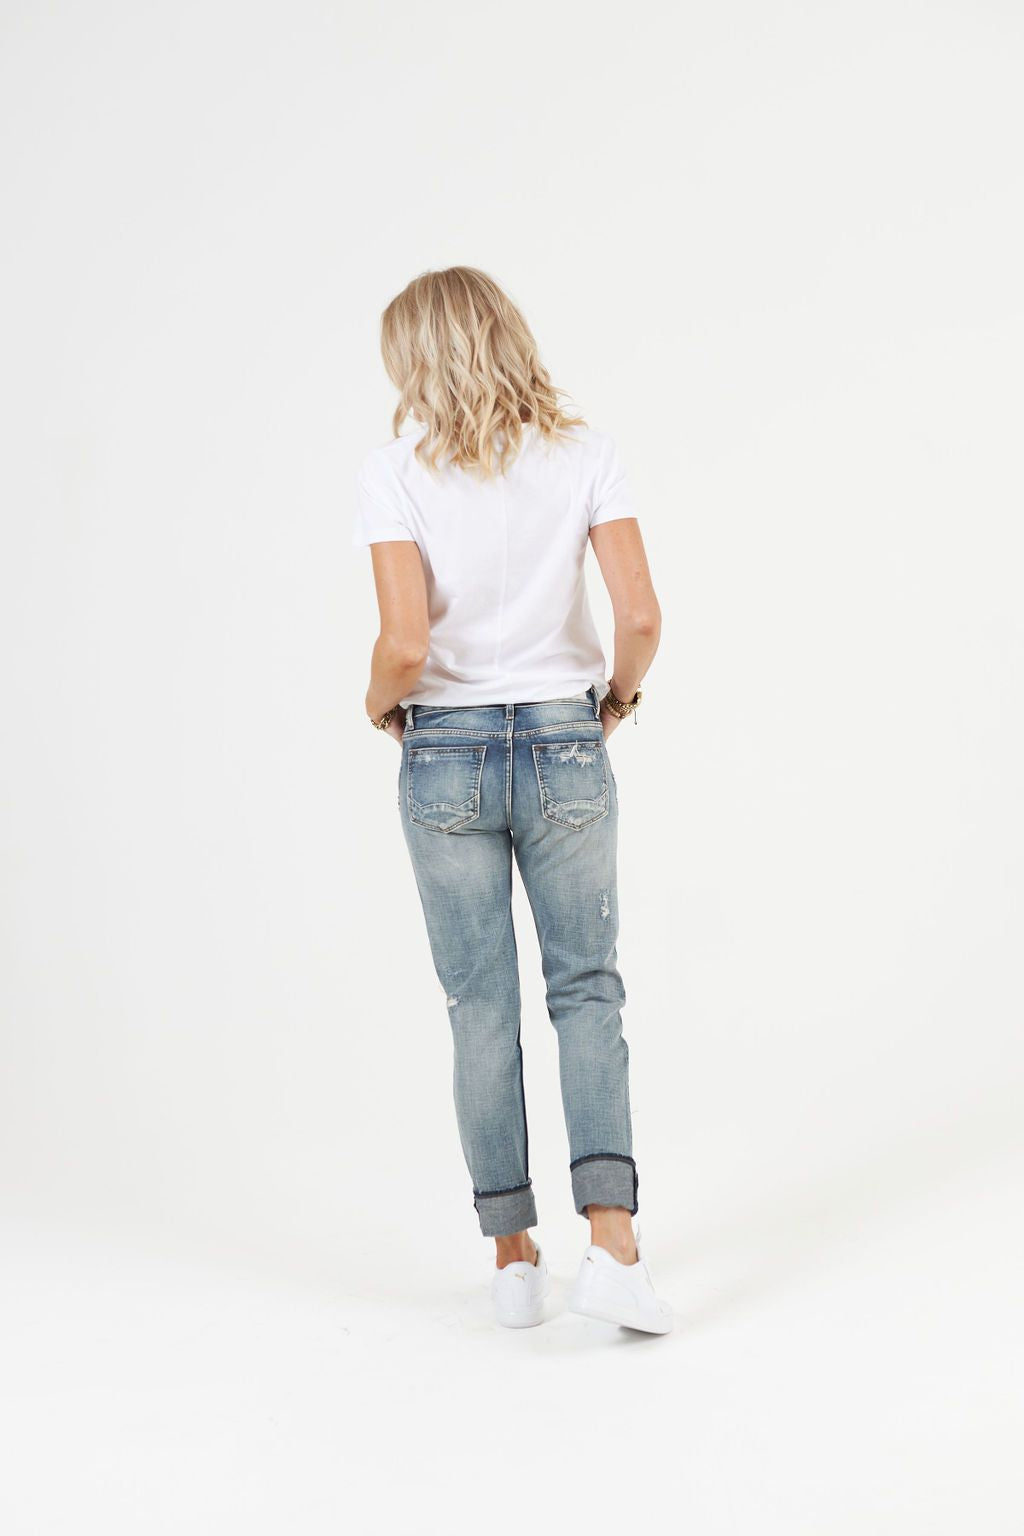 Cult of Individuality Piper Alter Ego Jeans - Shop 9